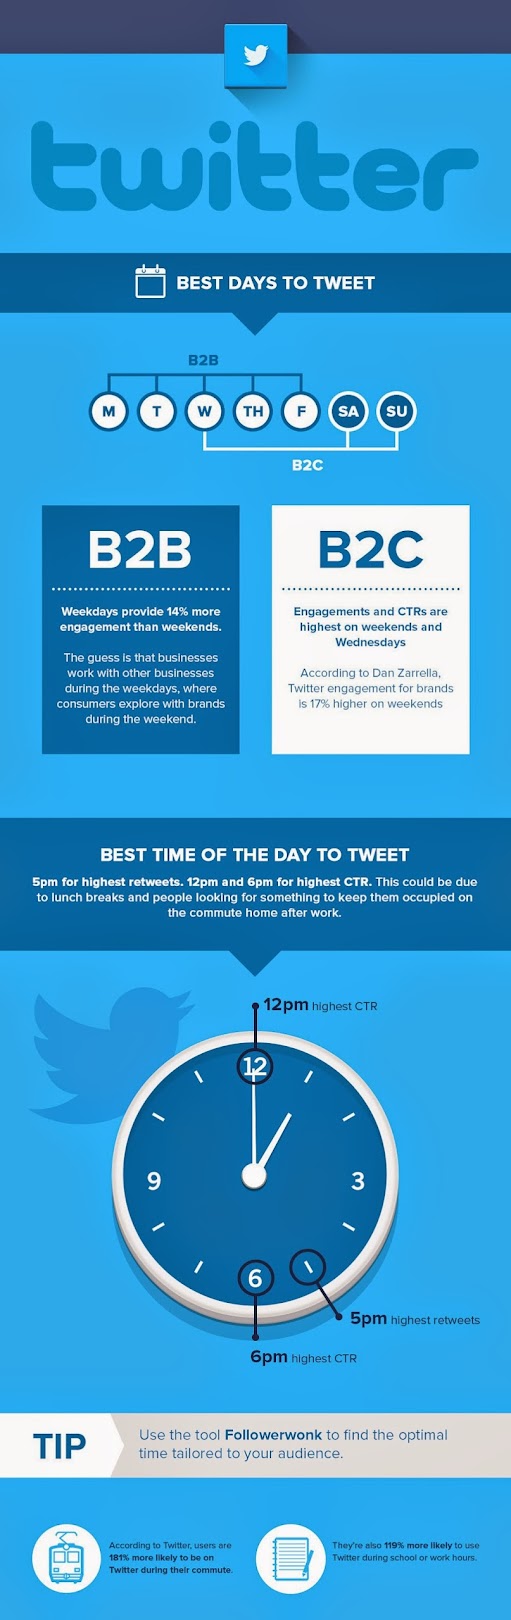 2. What's the best time to tweet on twitter?